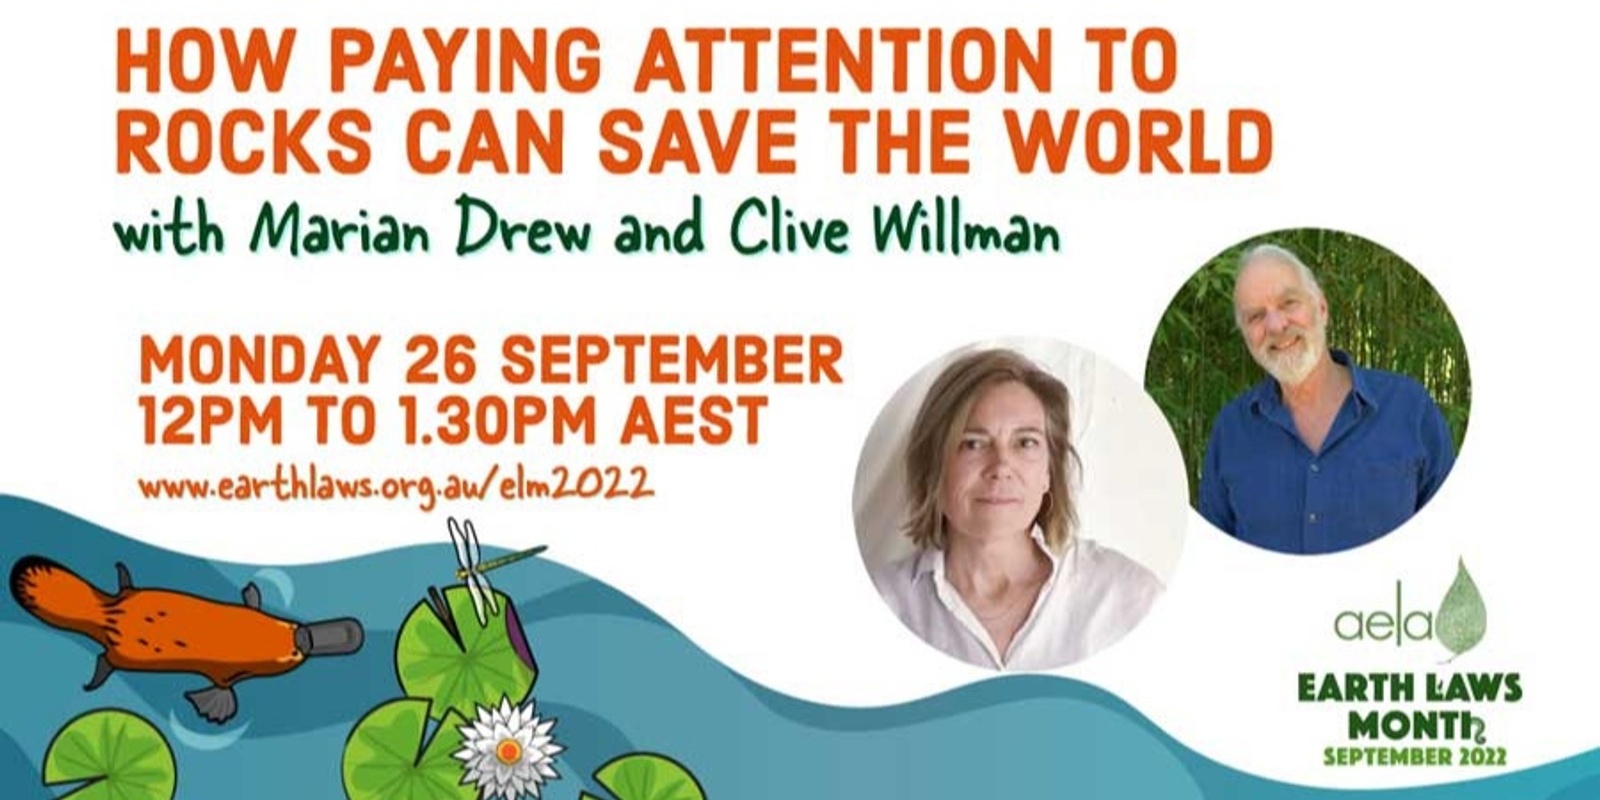 How paying attention to rocks can save the world with Marian Drew and Clive Willman